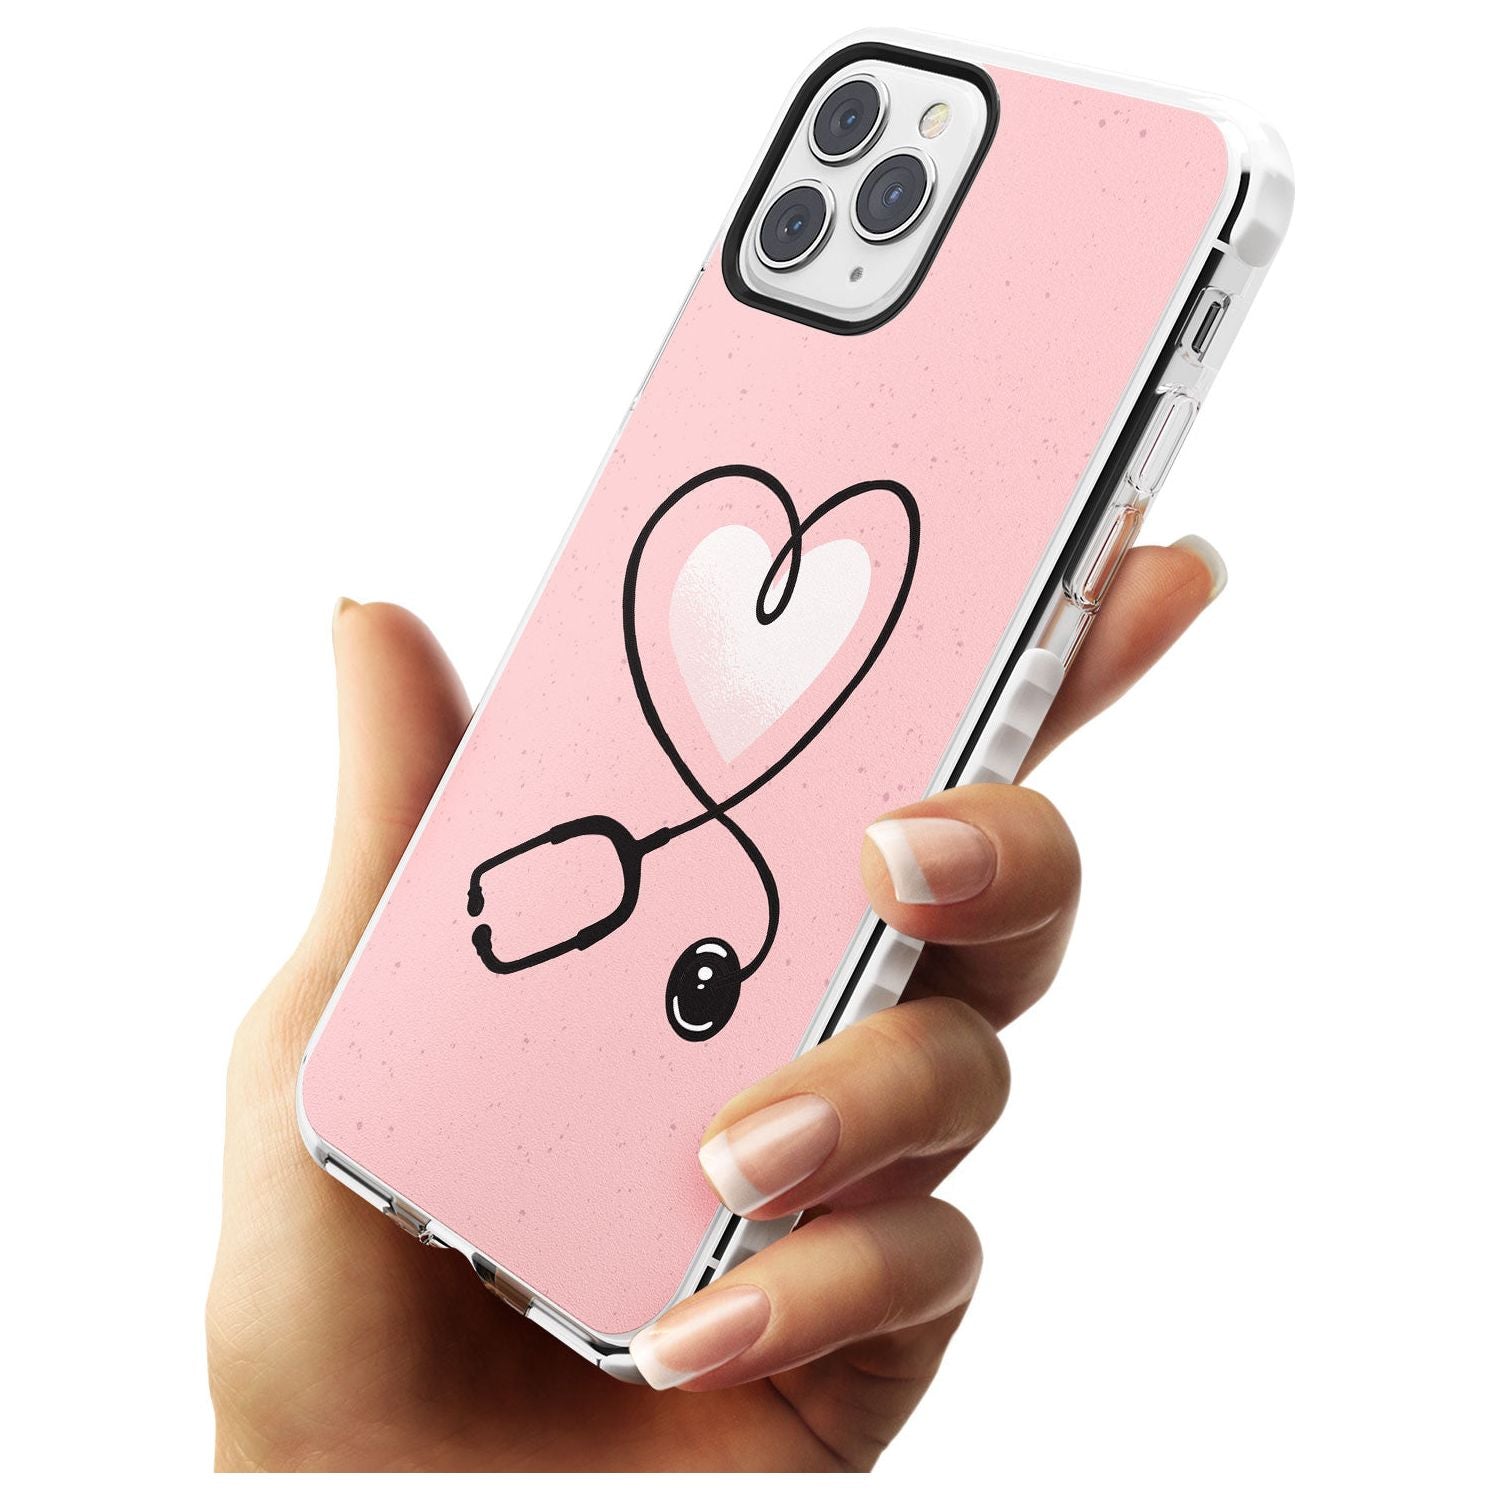 Medical Inspired Design Stethoscope Heart Impact Phone Case for iPhone 11 Pro Max